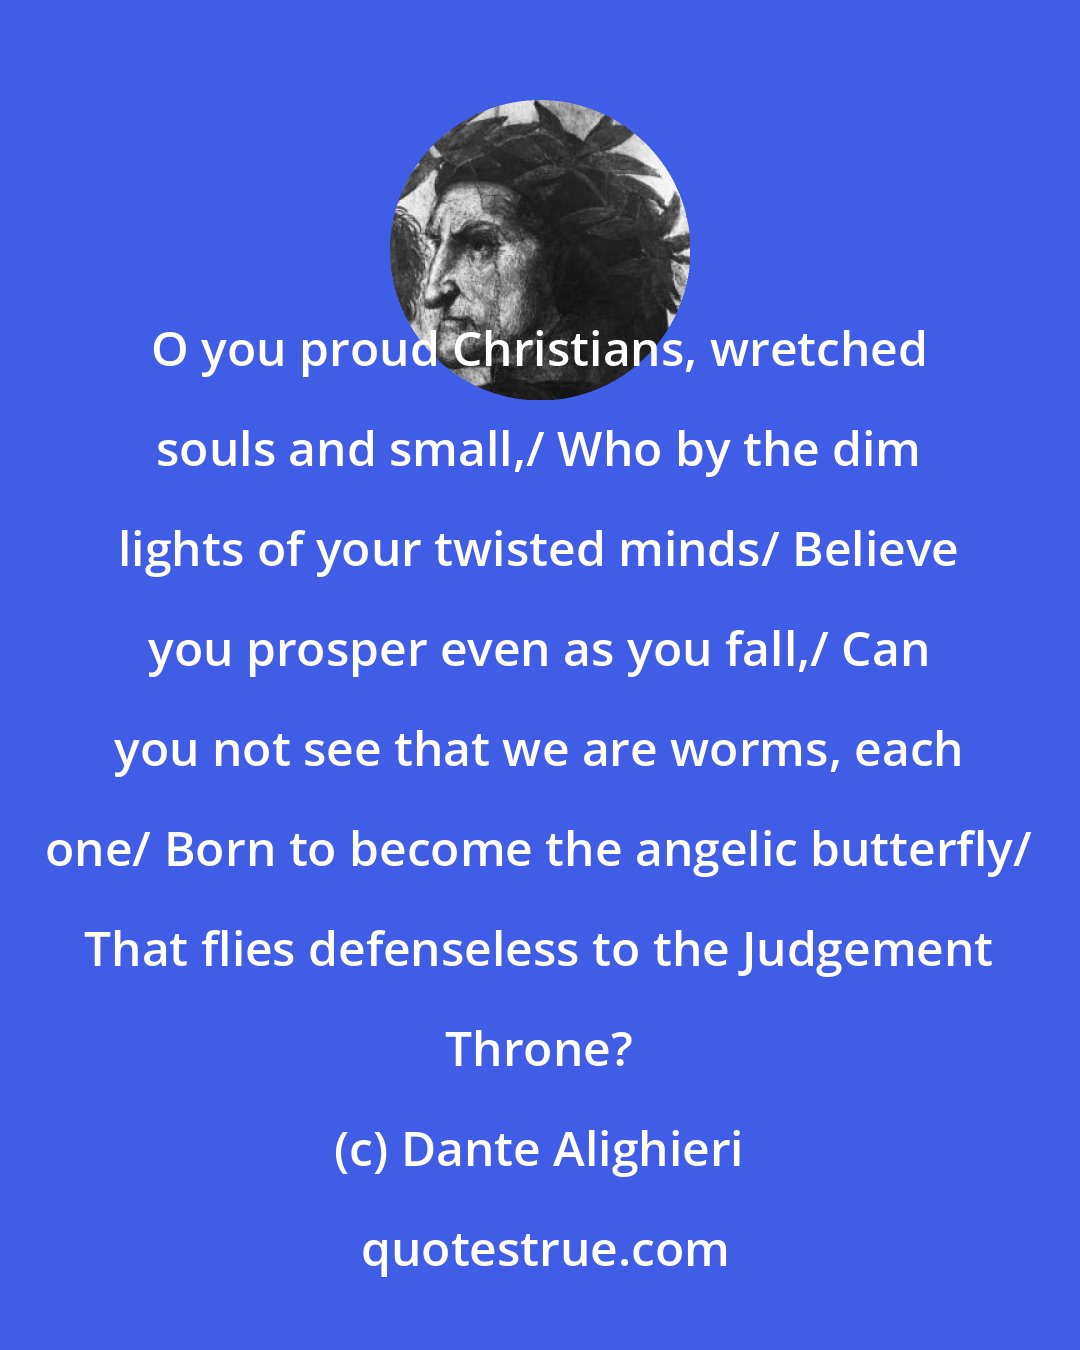 Dante Alighieri: O you proud Christians, wretched souls and small,/ Who by the dim lights of your twisted minds/ Believe you prosper even as you fall,/ Can you not see that we are worms, each one/ Born to become the angelic butterfly/ That flies defenseless to the Judgement Throne?